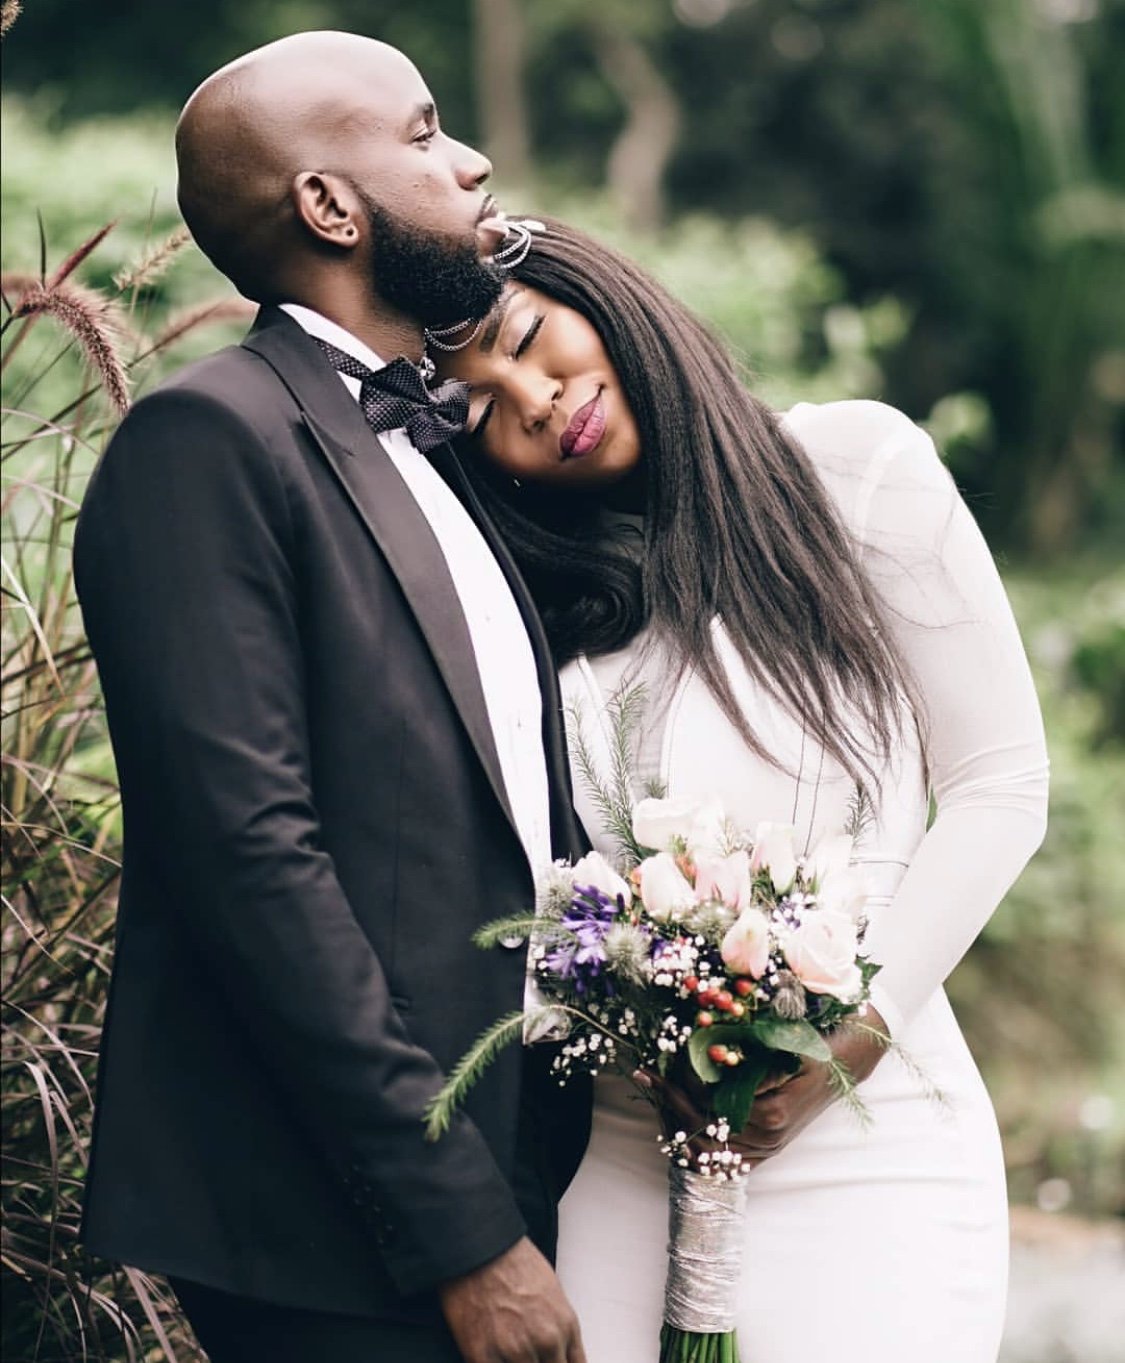 Singer Dela weds the love of her life in a low key wedding (Photos)